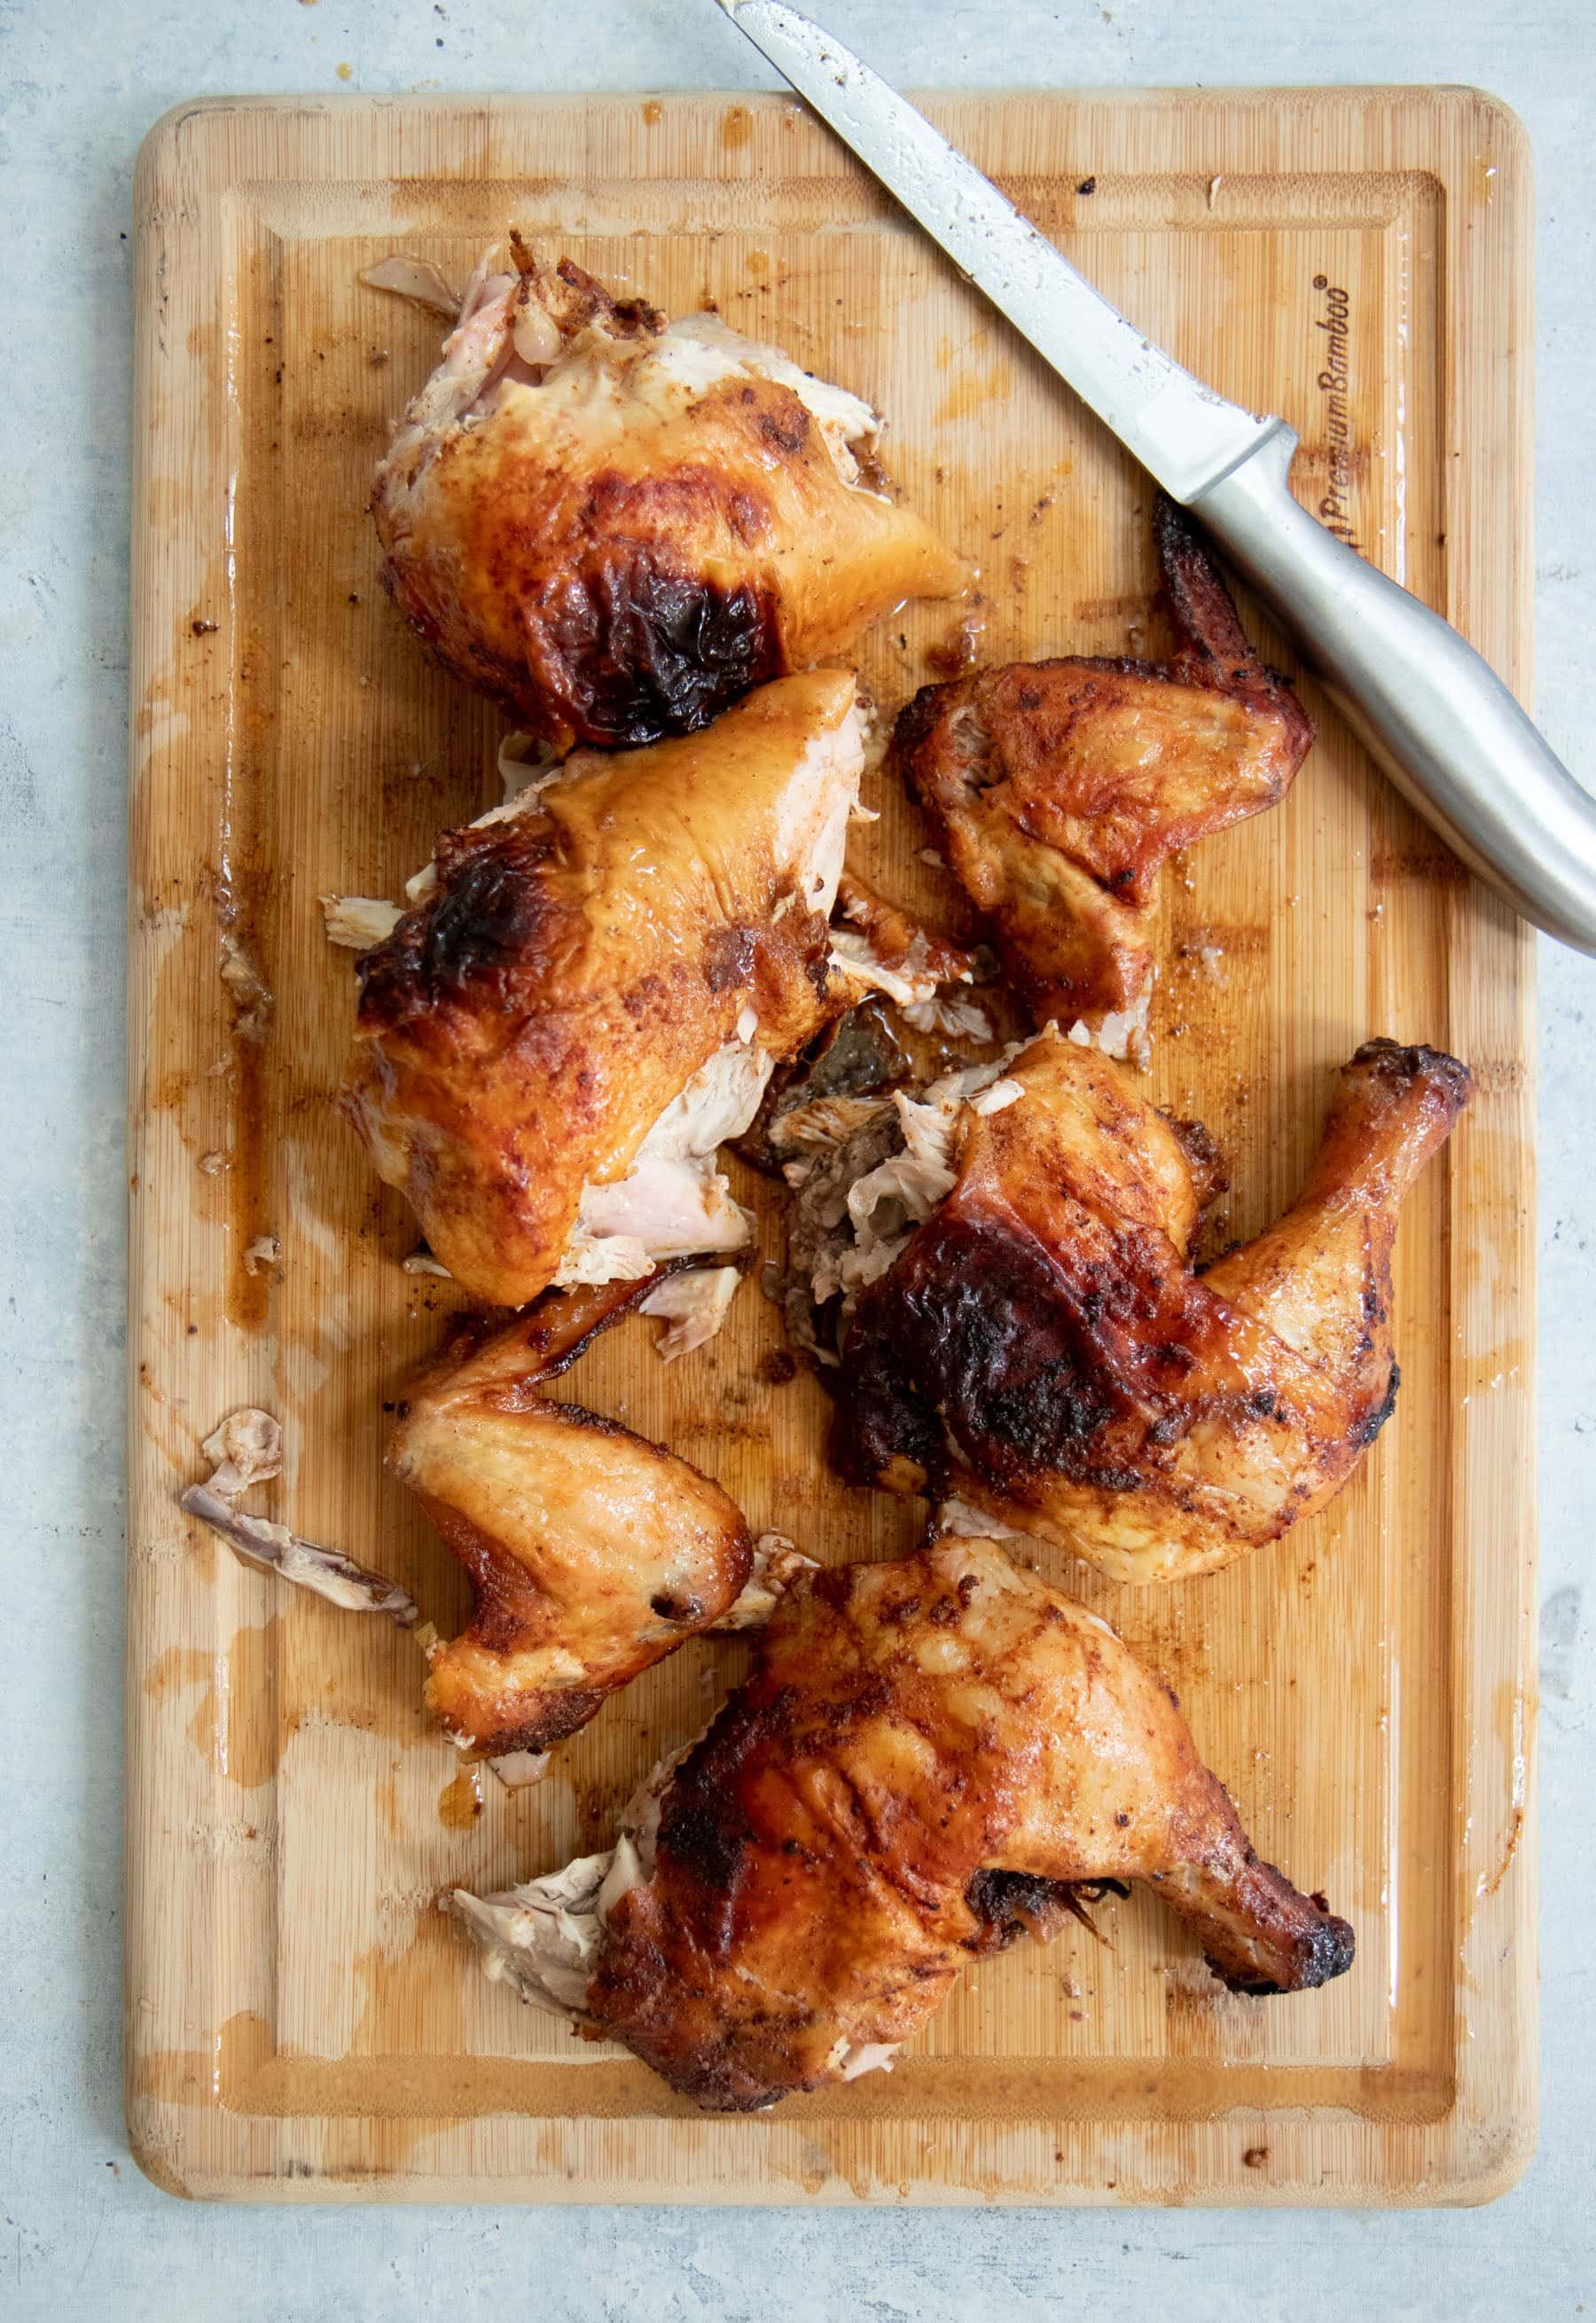 Overhead shot of cut-up grilled chicken on a wooden cutting board